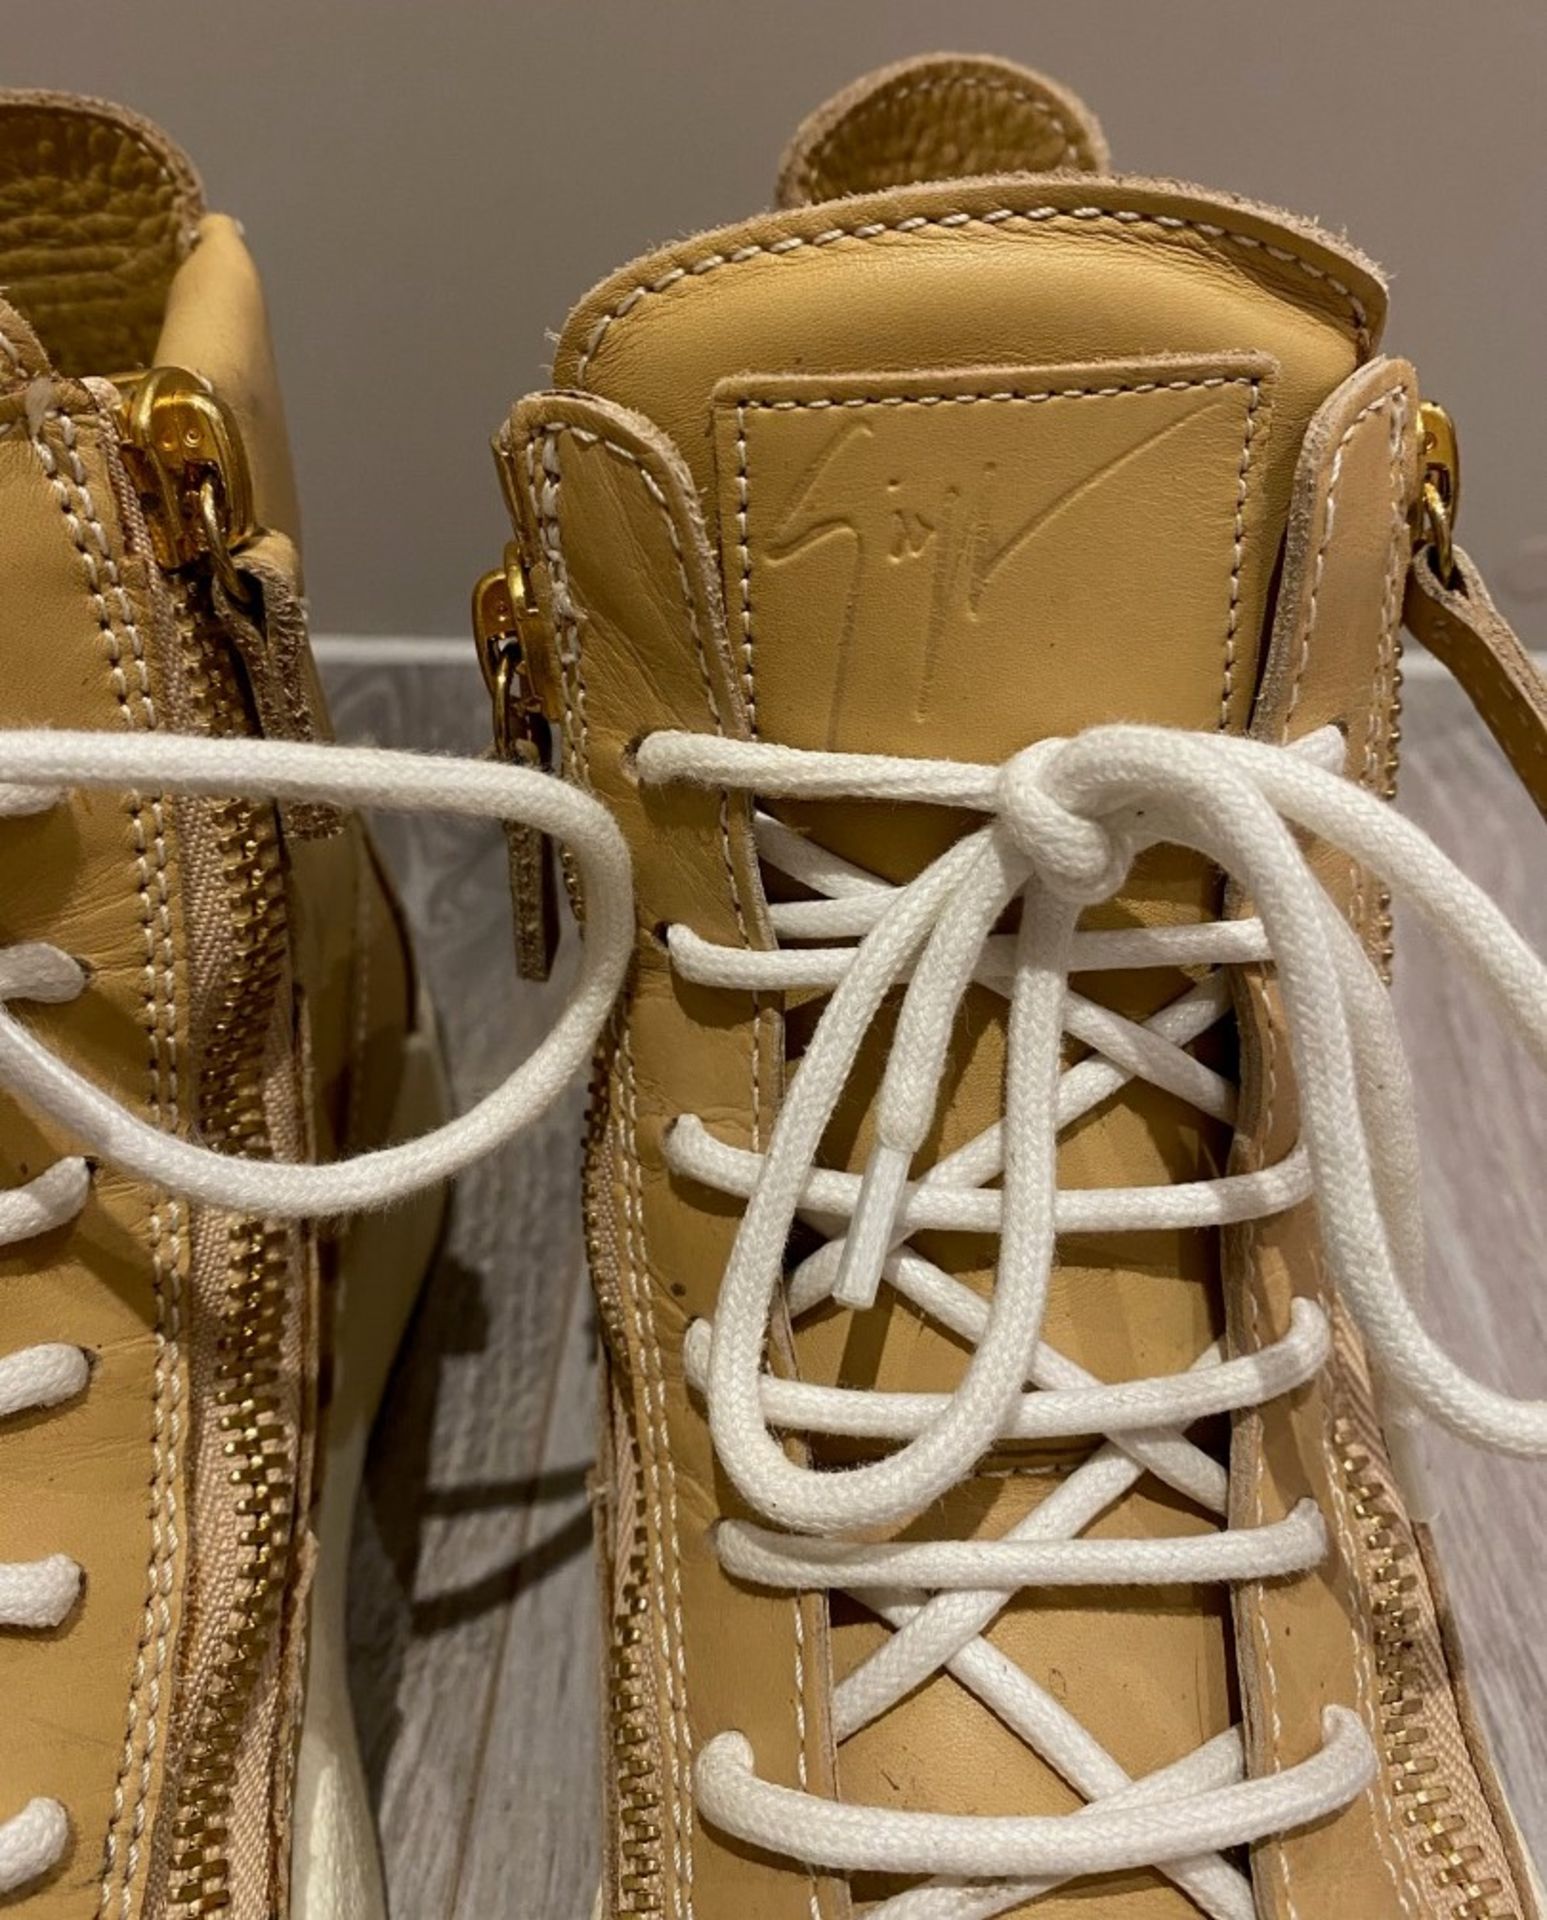 1 x Pair Of Genuine Guiseppe Zanotti Sneakers In Tan - Size: 36 - Preowned in Good Condition - Ref: - Image 5 of 5